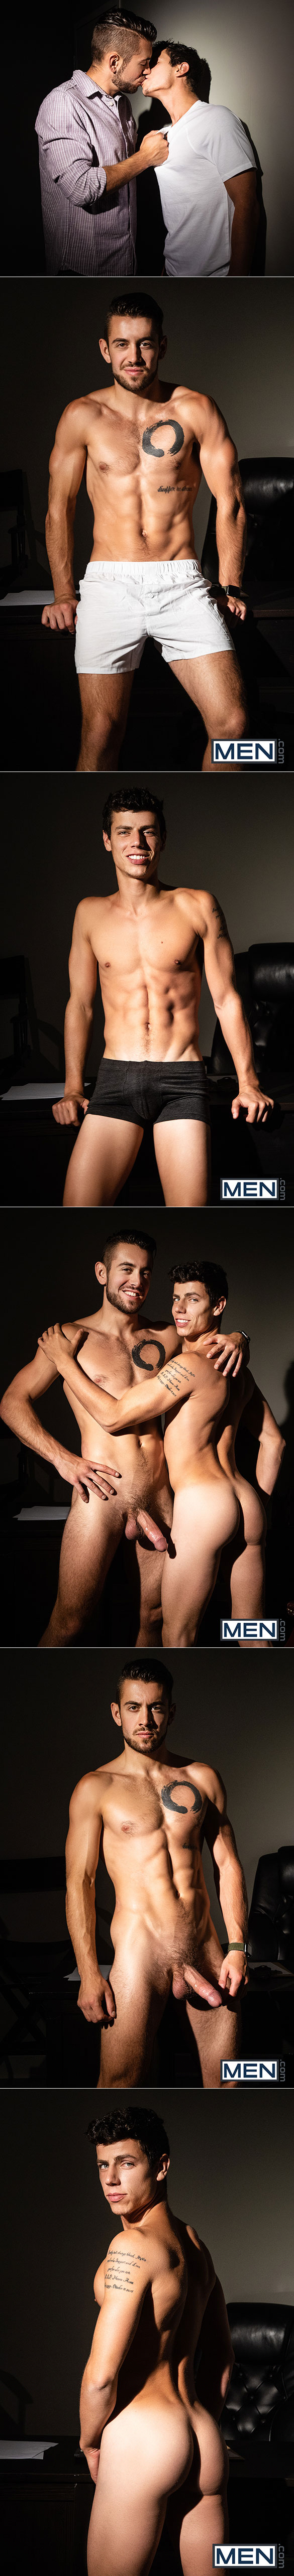 Men.com: Dante Colle and Kaleb Stryker flip fuck in "Where We Came From"